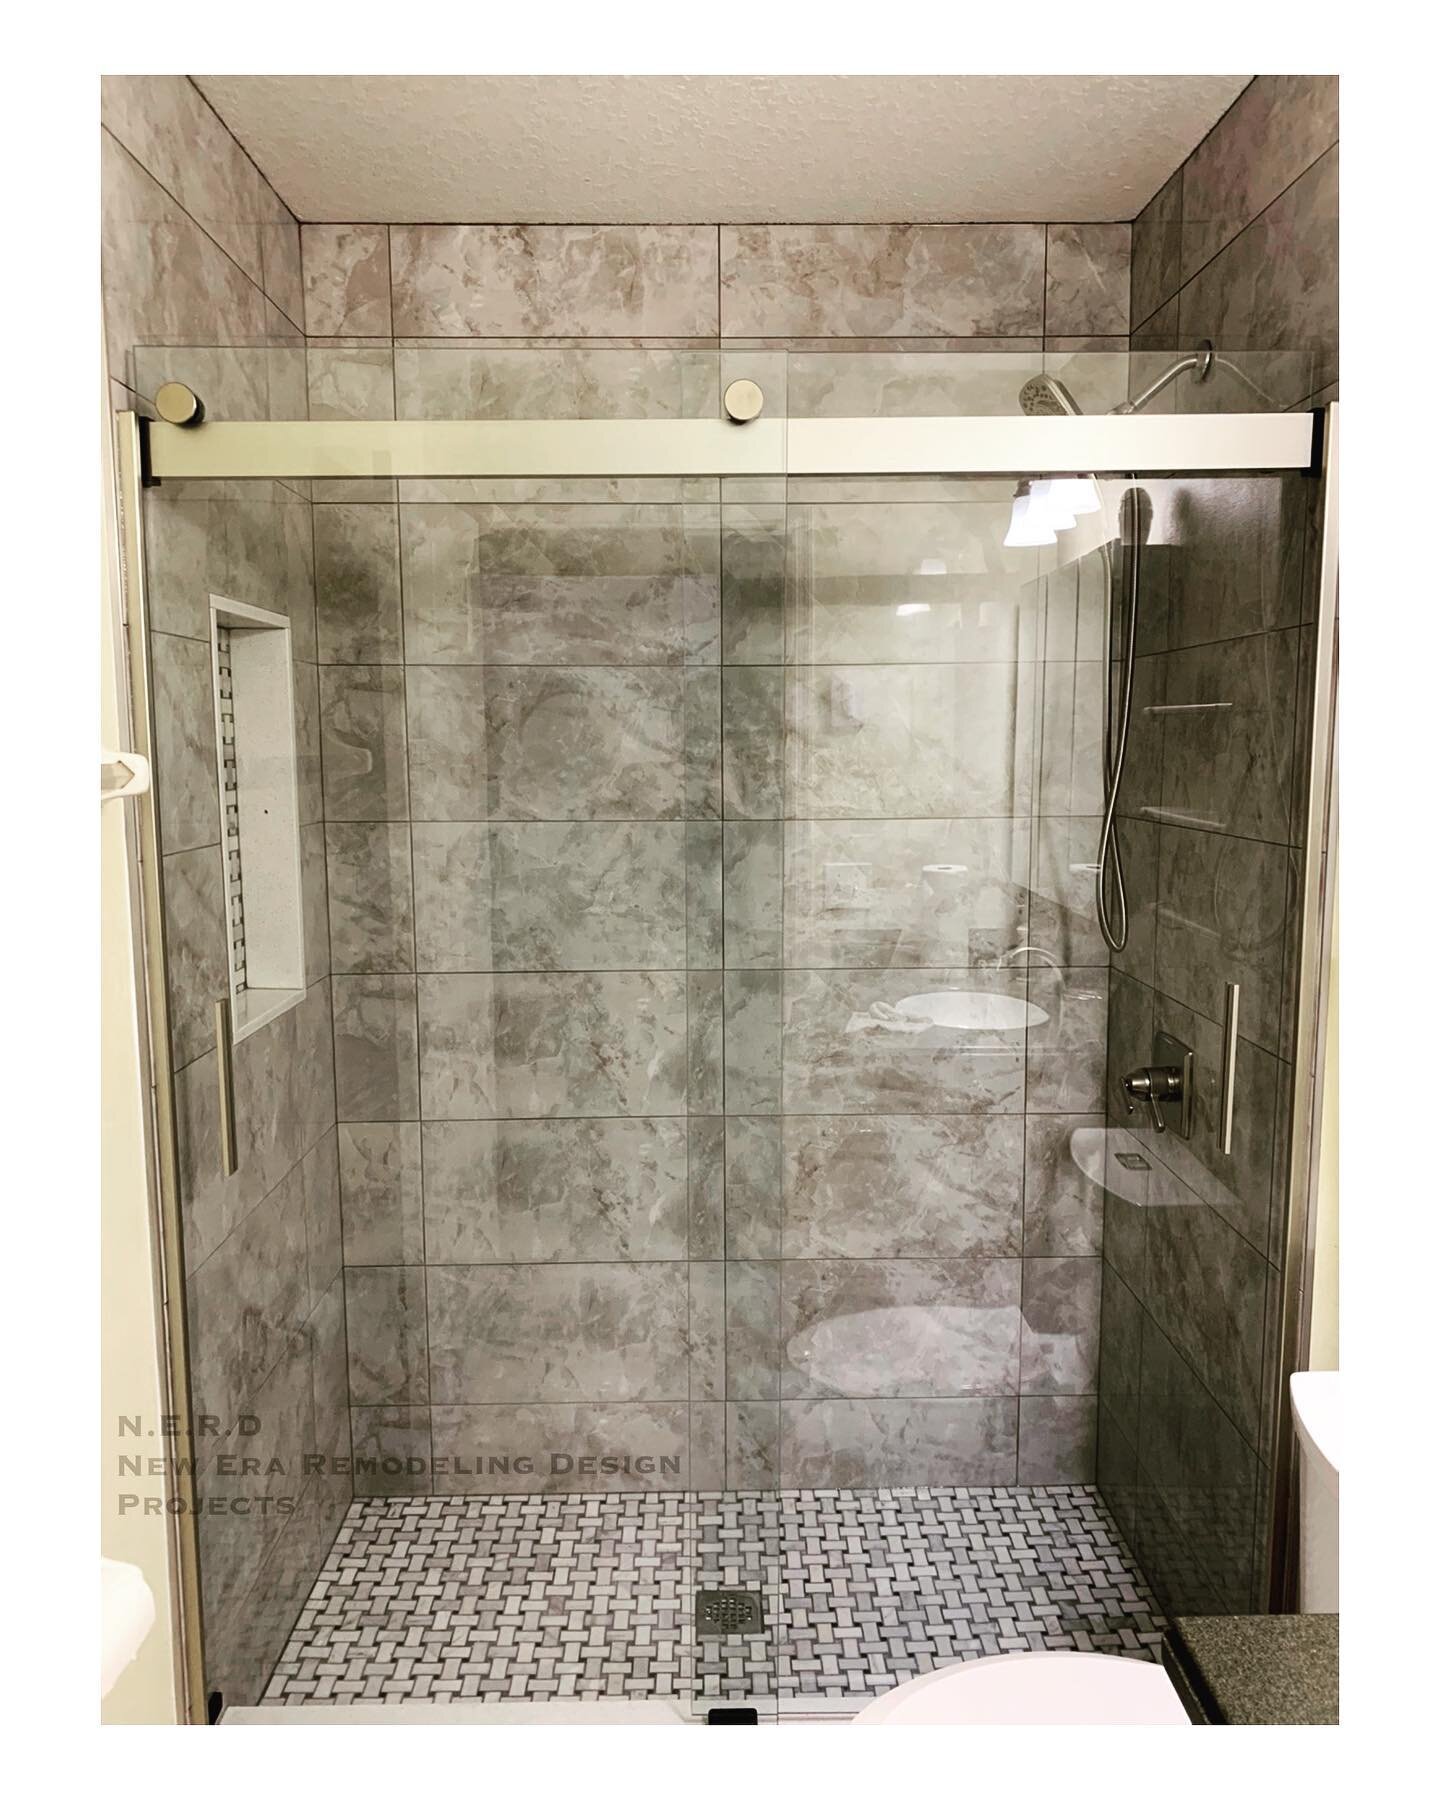 From tub to Custom Shower install.  Complete remodel. Before &amp; After . #TeamNeRdProjects #interiorremodeling #homeimprovement #houzz #HGTV #brooklyncontractor #interiordesign #remodeling #spaceplanning #architecturedesign #diy #architecture #cons